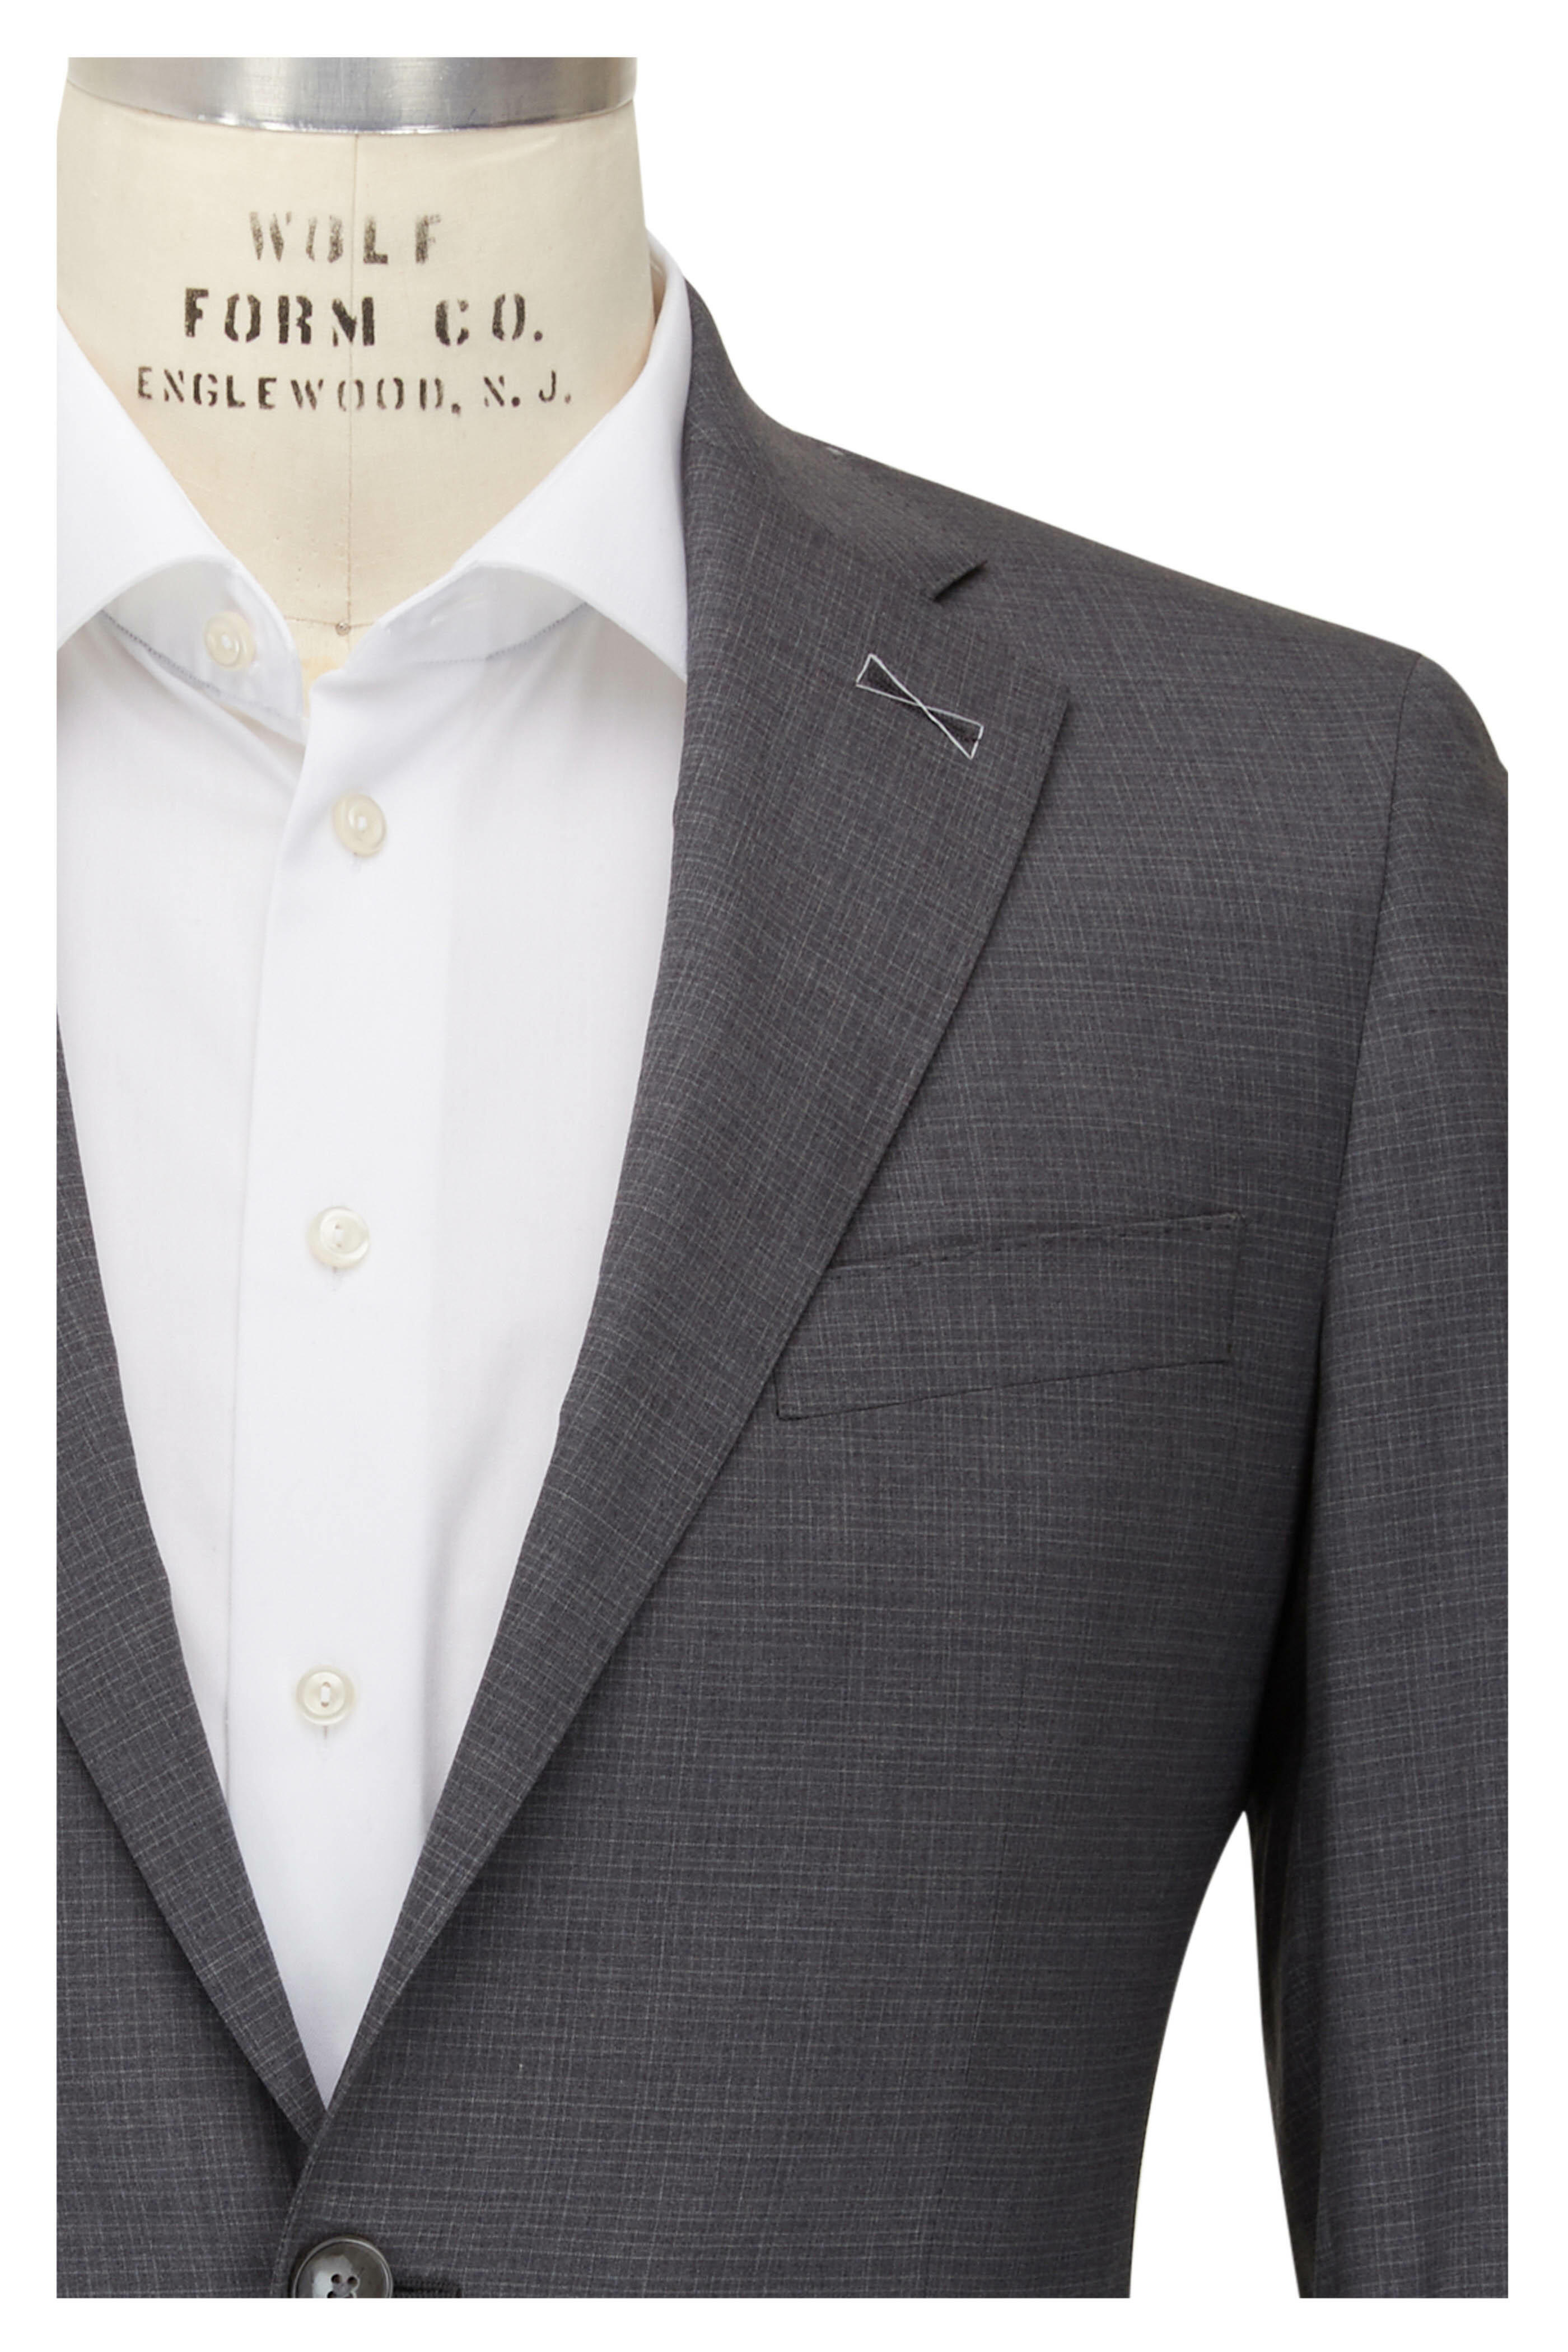 Atelier Munro - Stone Gray Micro Check Suit | Mitchell Stores